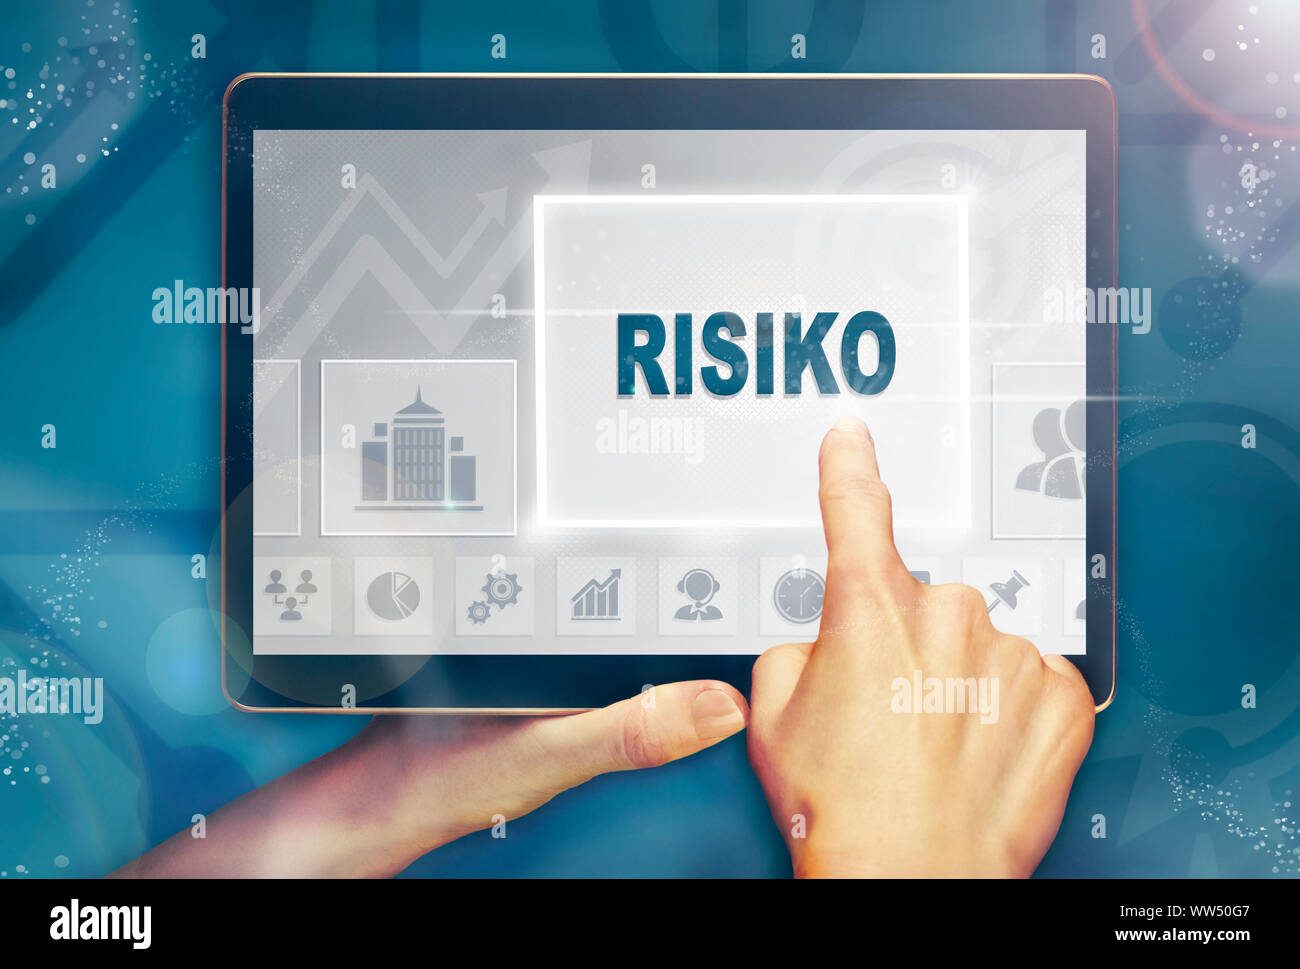 A hand holiding a computer tablet and pressing a Risk "Risiko" business concept. Stock Photo